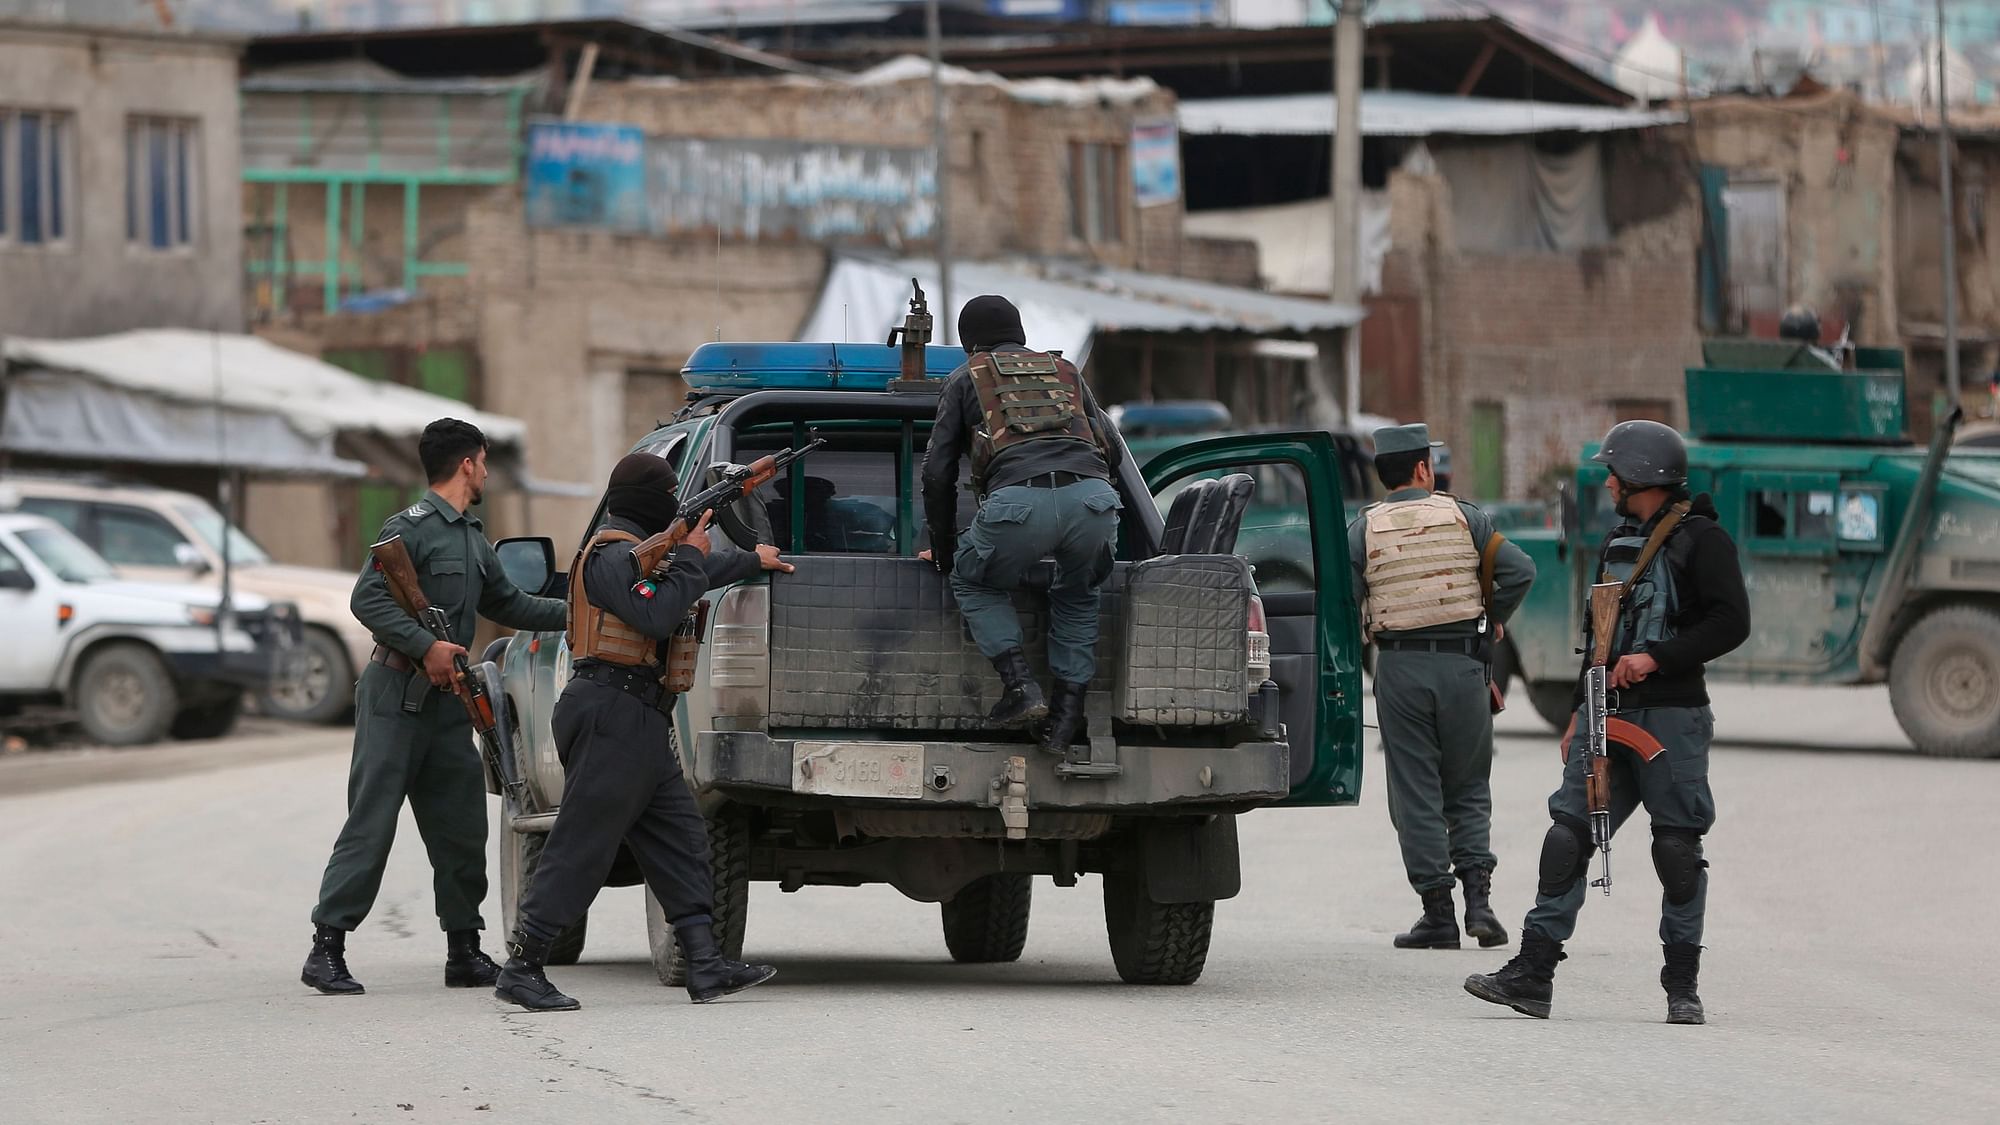 Afghan personnel arrive at the site of an attack in Kabul, Afghanistan, Wednesday, March 25, 2020. Image used for representational purposes.